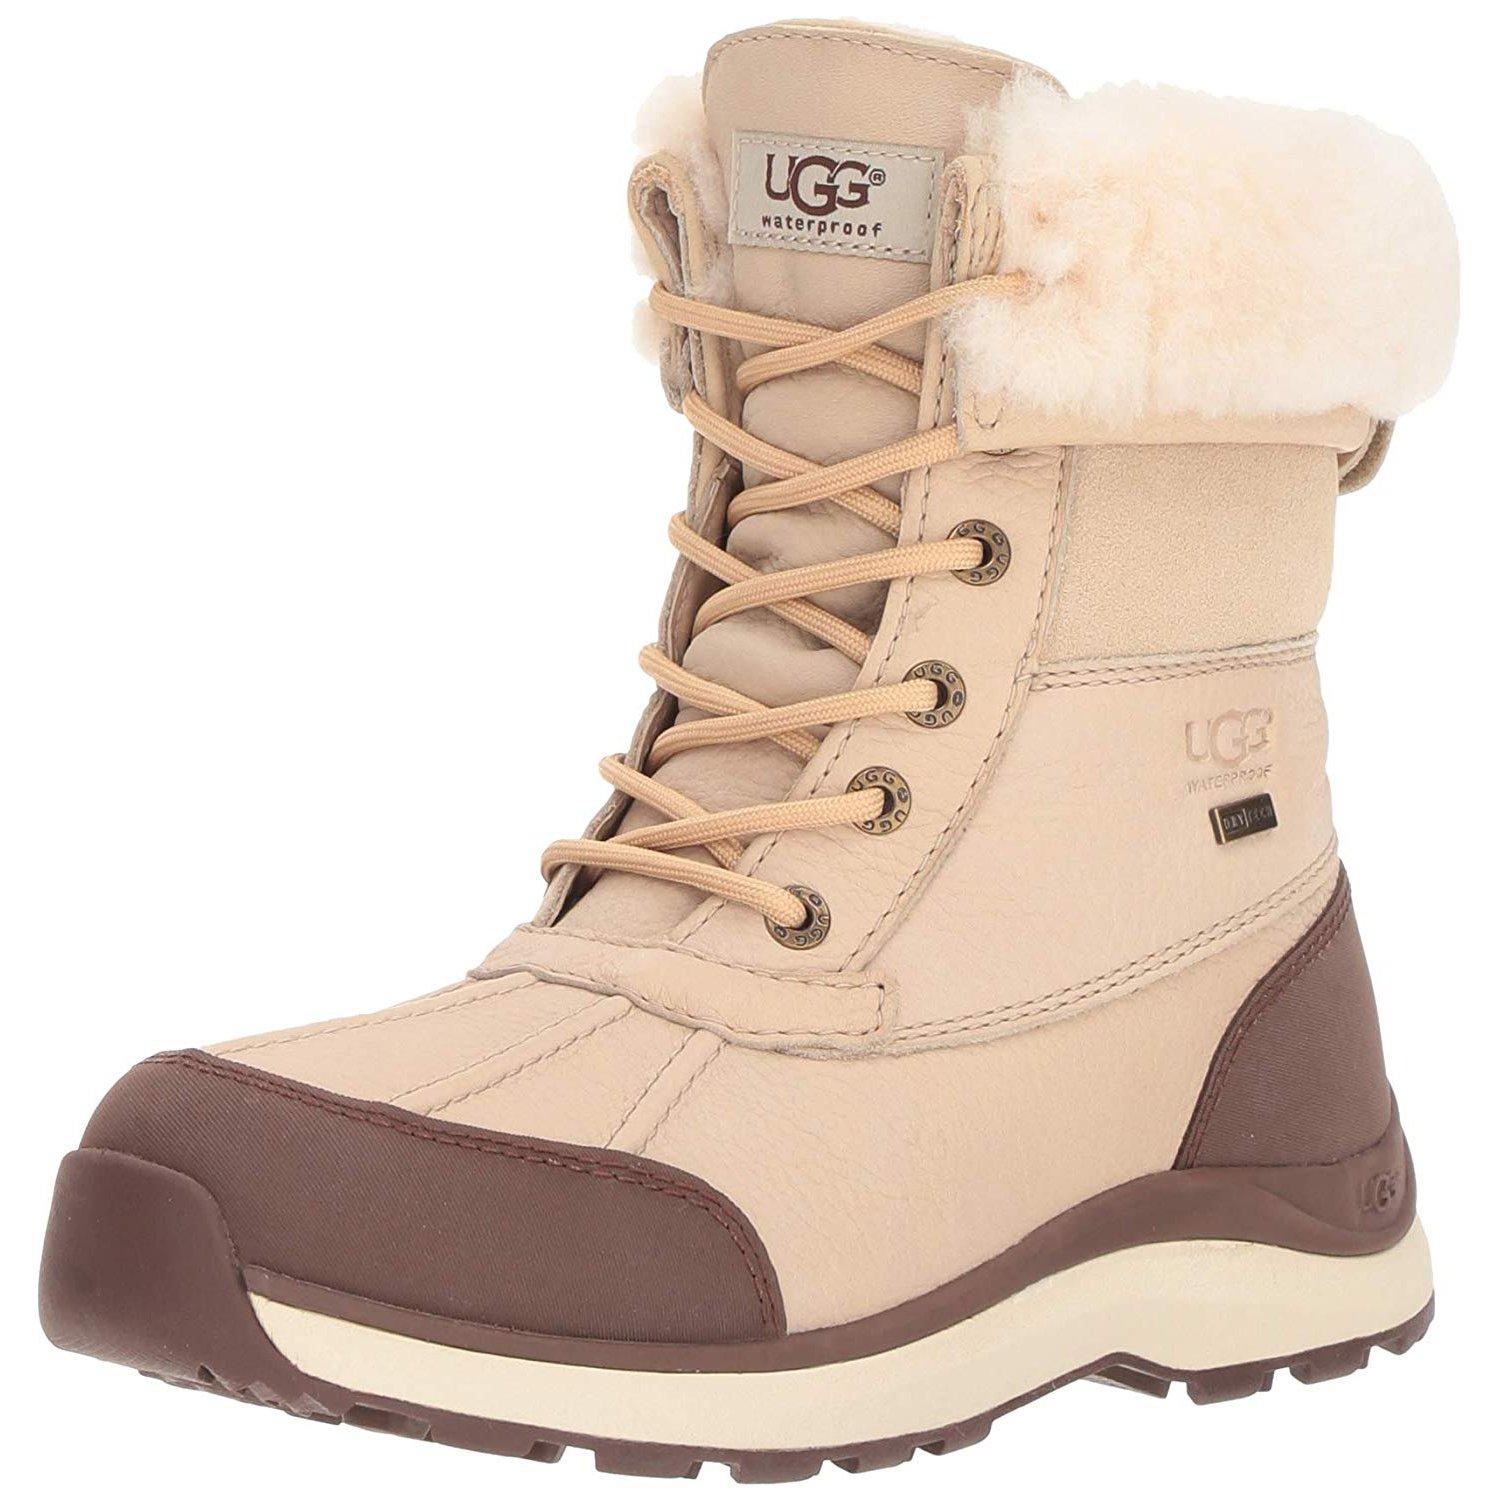 UGG Wool Adirondack Iii Boot in Sand (Natural) - Save 36% - Lyst